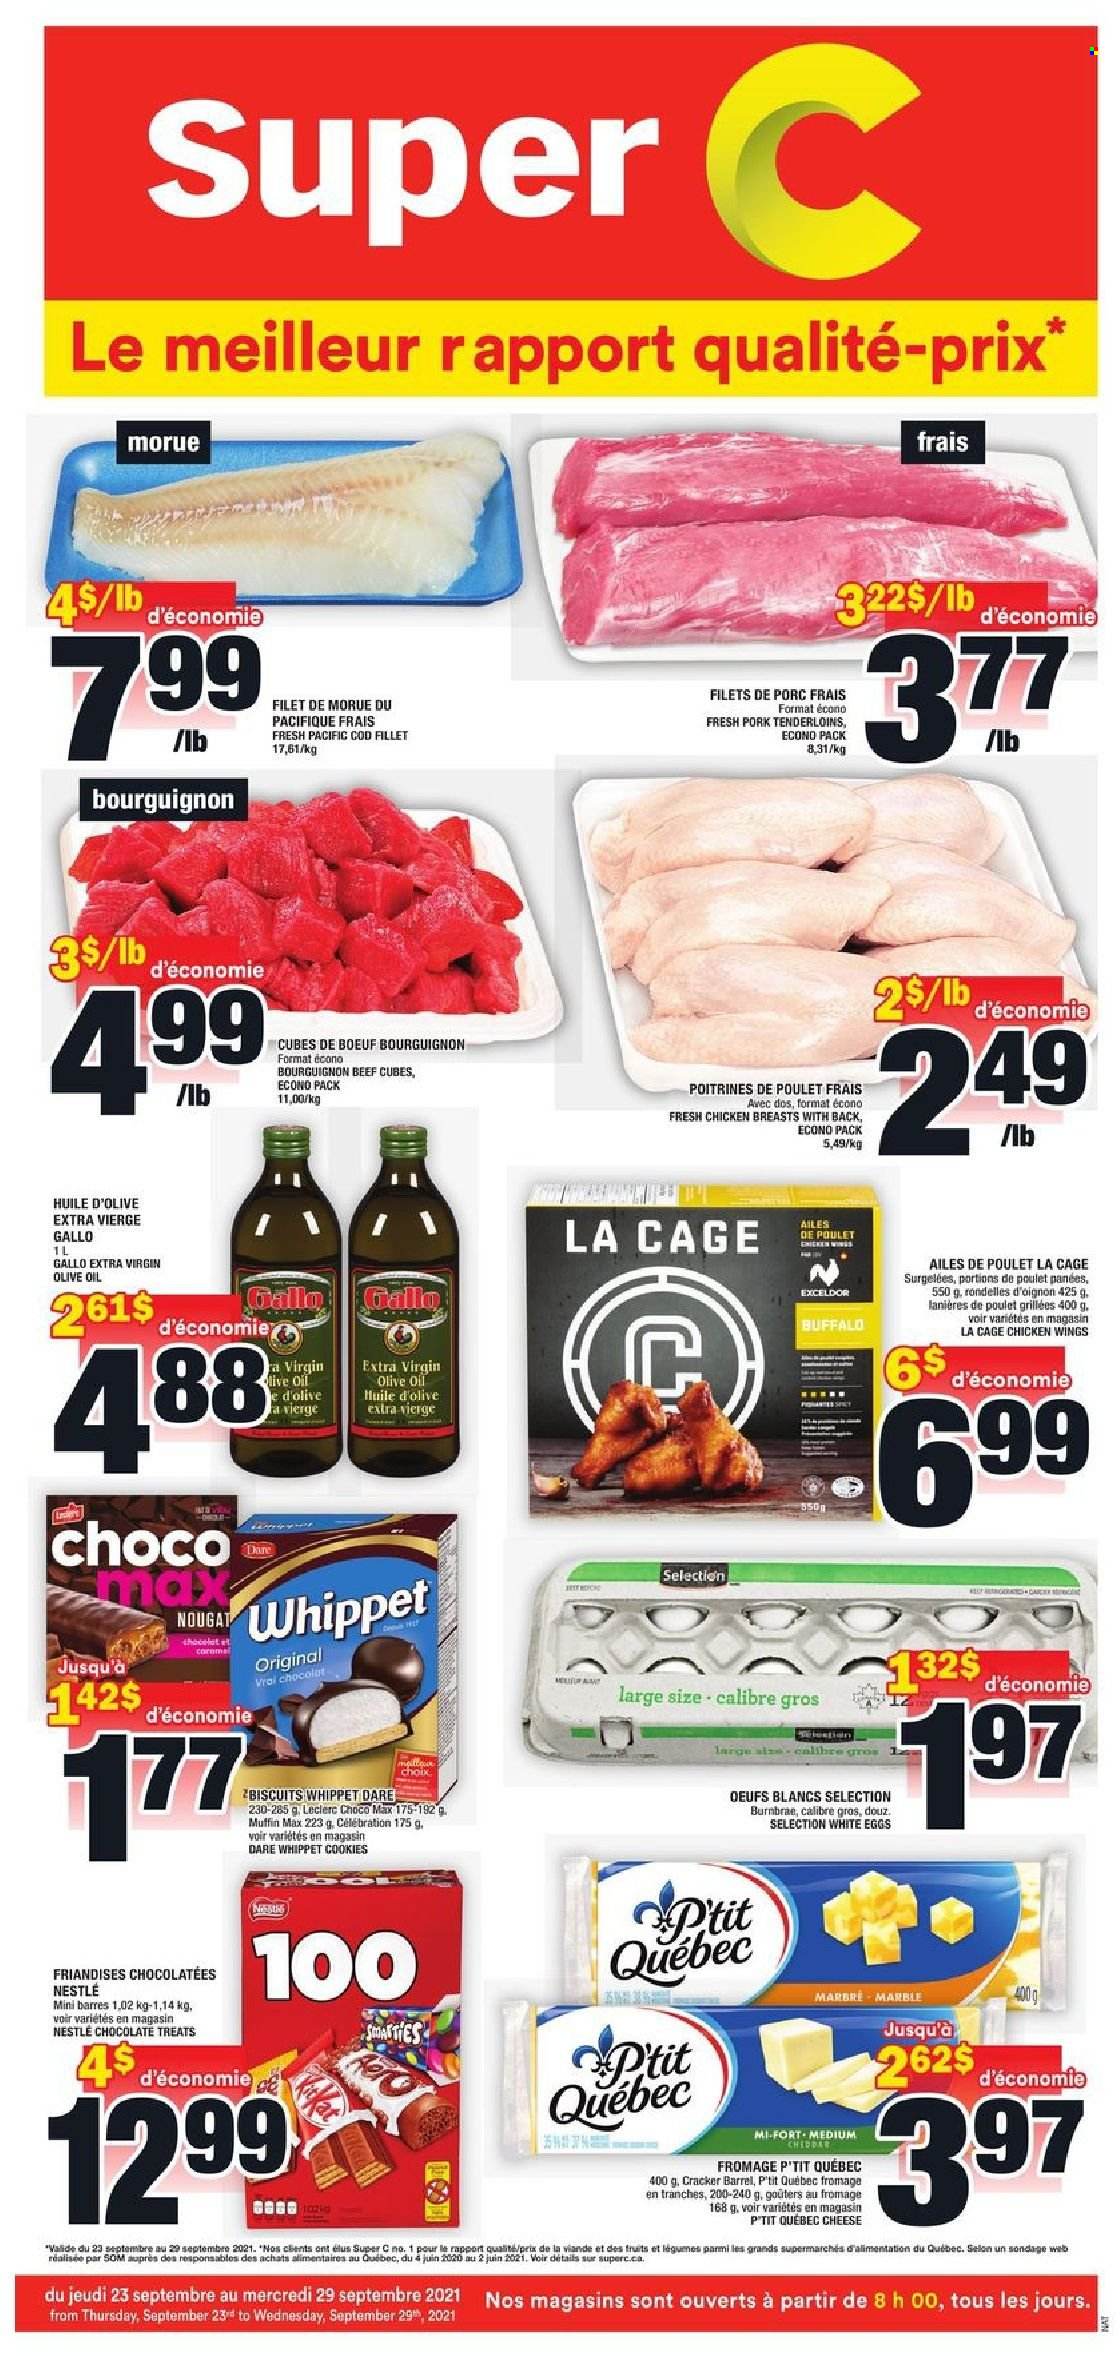 thumbnail - Super C Flyer - September 23, 2021 - September 29, 2021 - Sales products - muffin, cod, cheddar, cheese, eggs, chicken wings, cookies, chocolate, Celebration, extra virgin olive oil, olive oil, oil, chicken breasts, beef meat, pork tenderloin, Nestlé, nougat. Page 1.